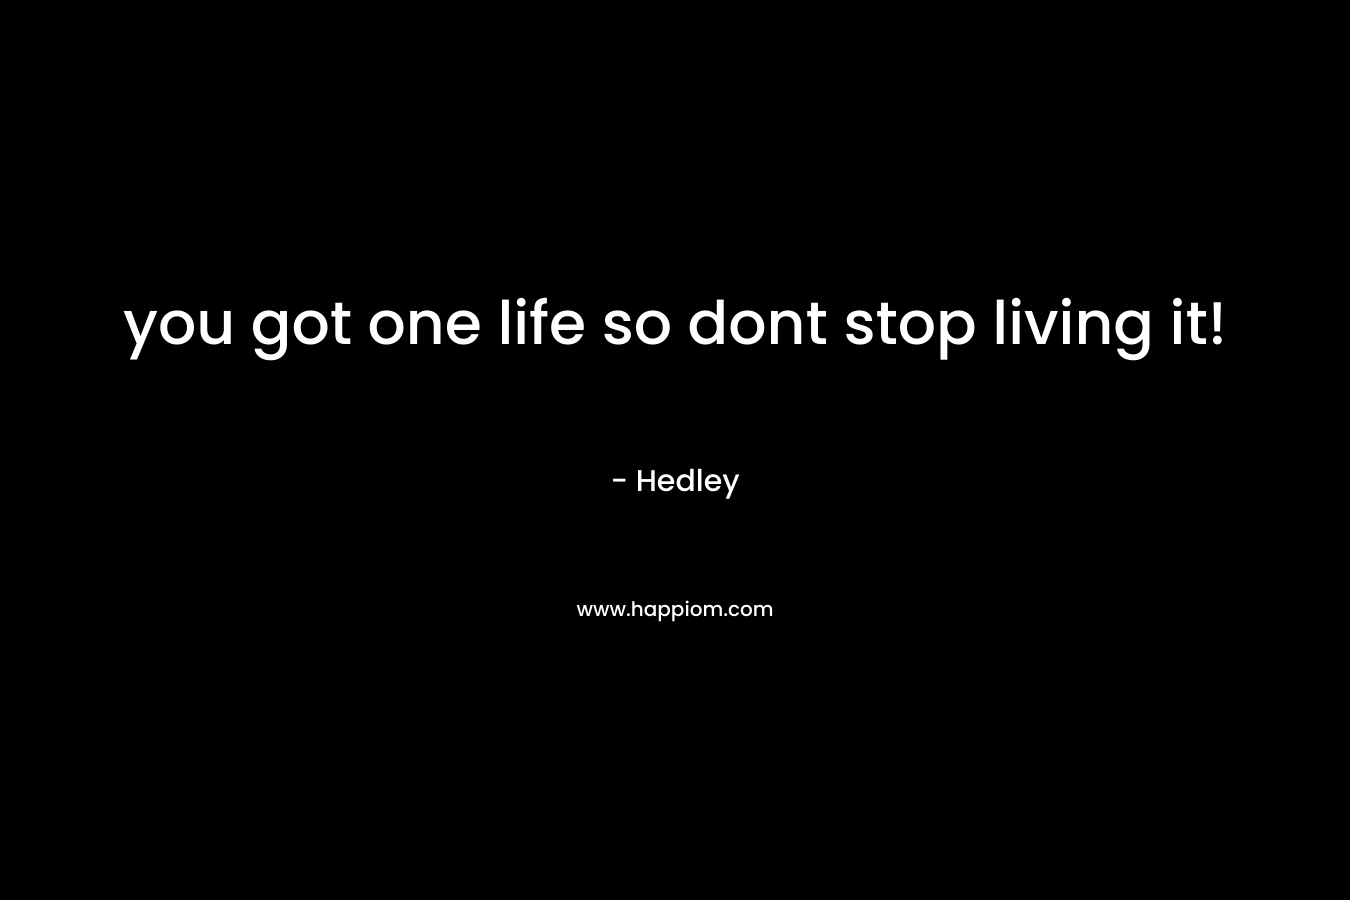 you got one life so dont stop living it!